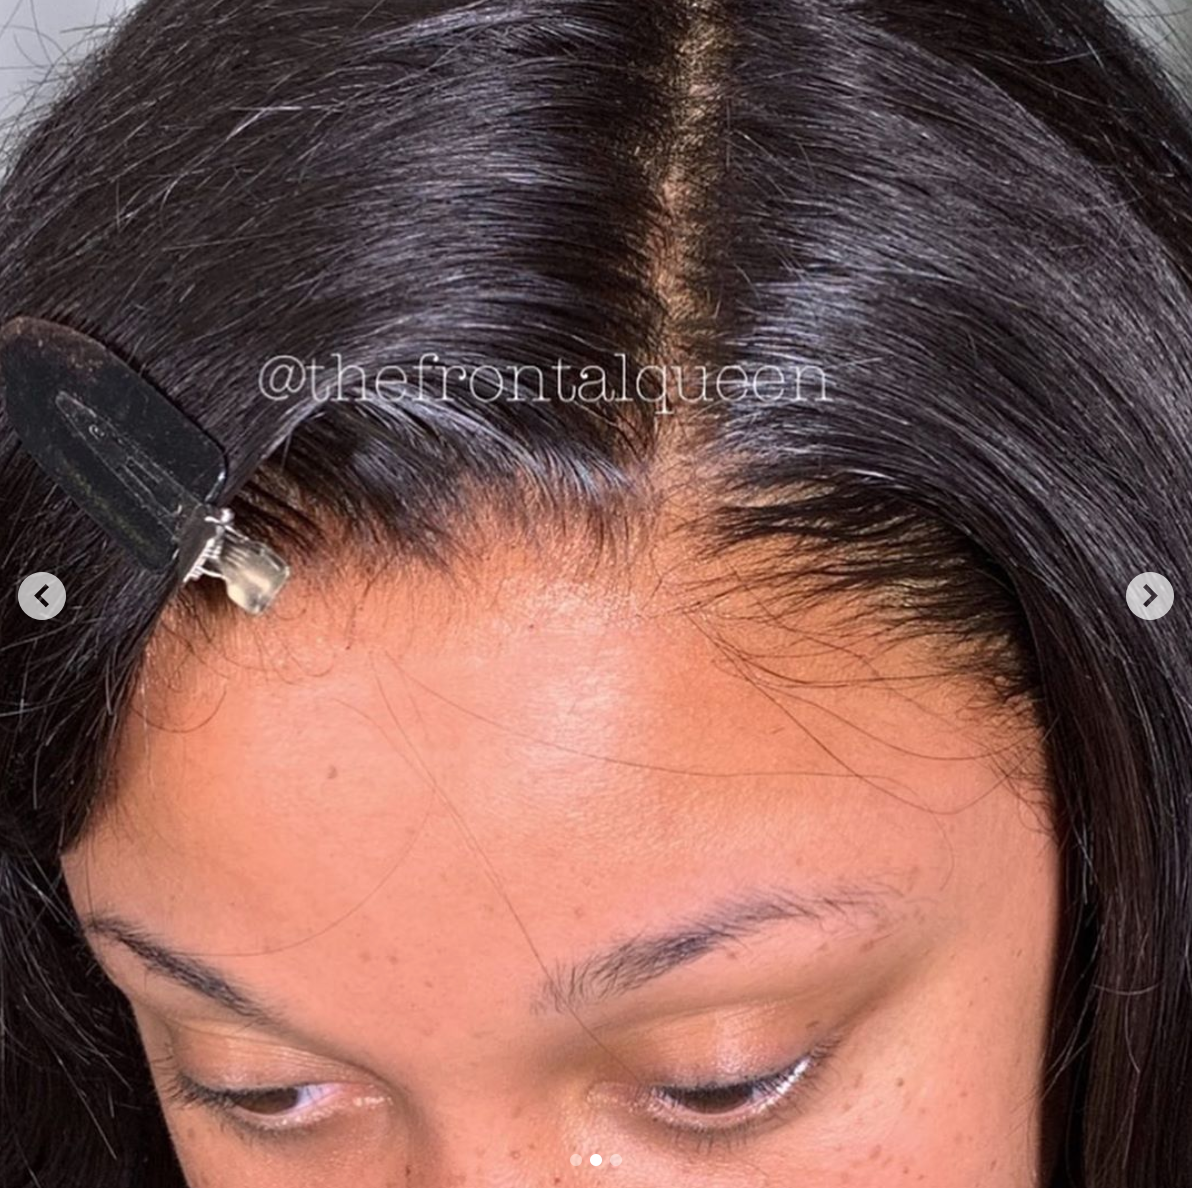 INVISILACE™ FRONTAL (STRAIGHT) - The Frontal Queen